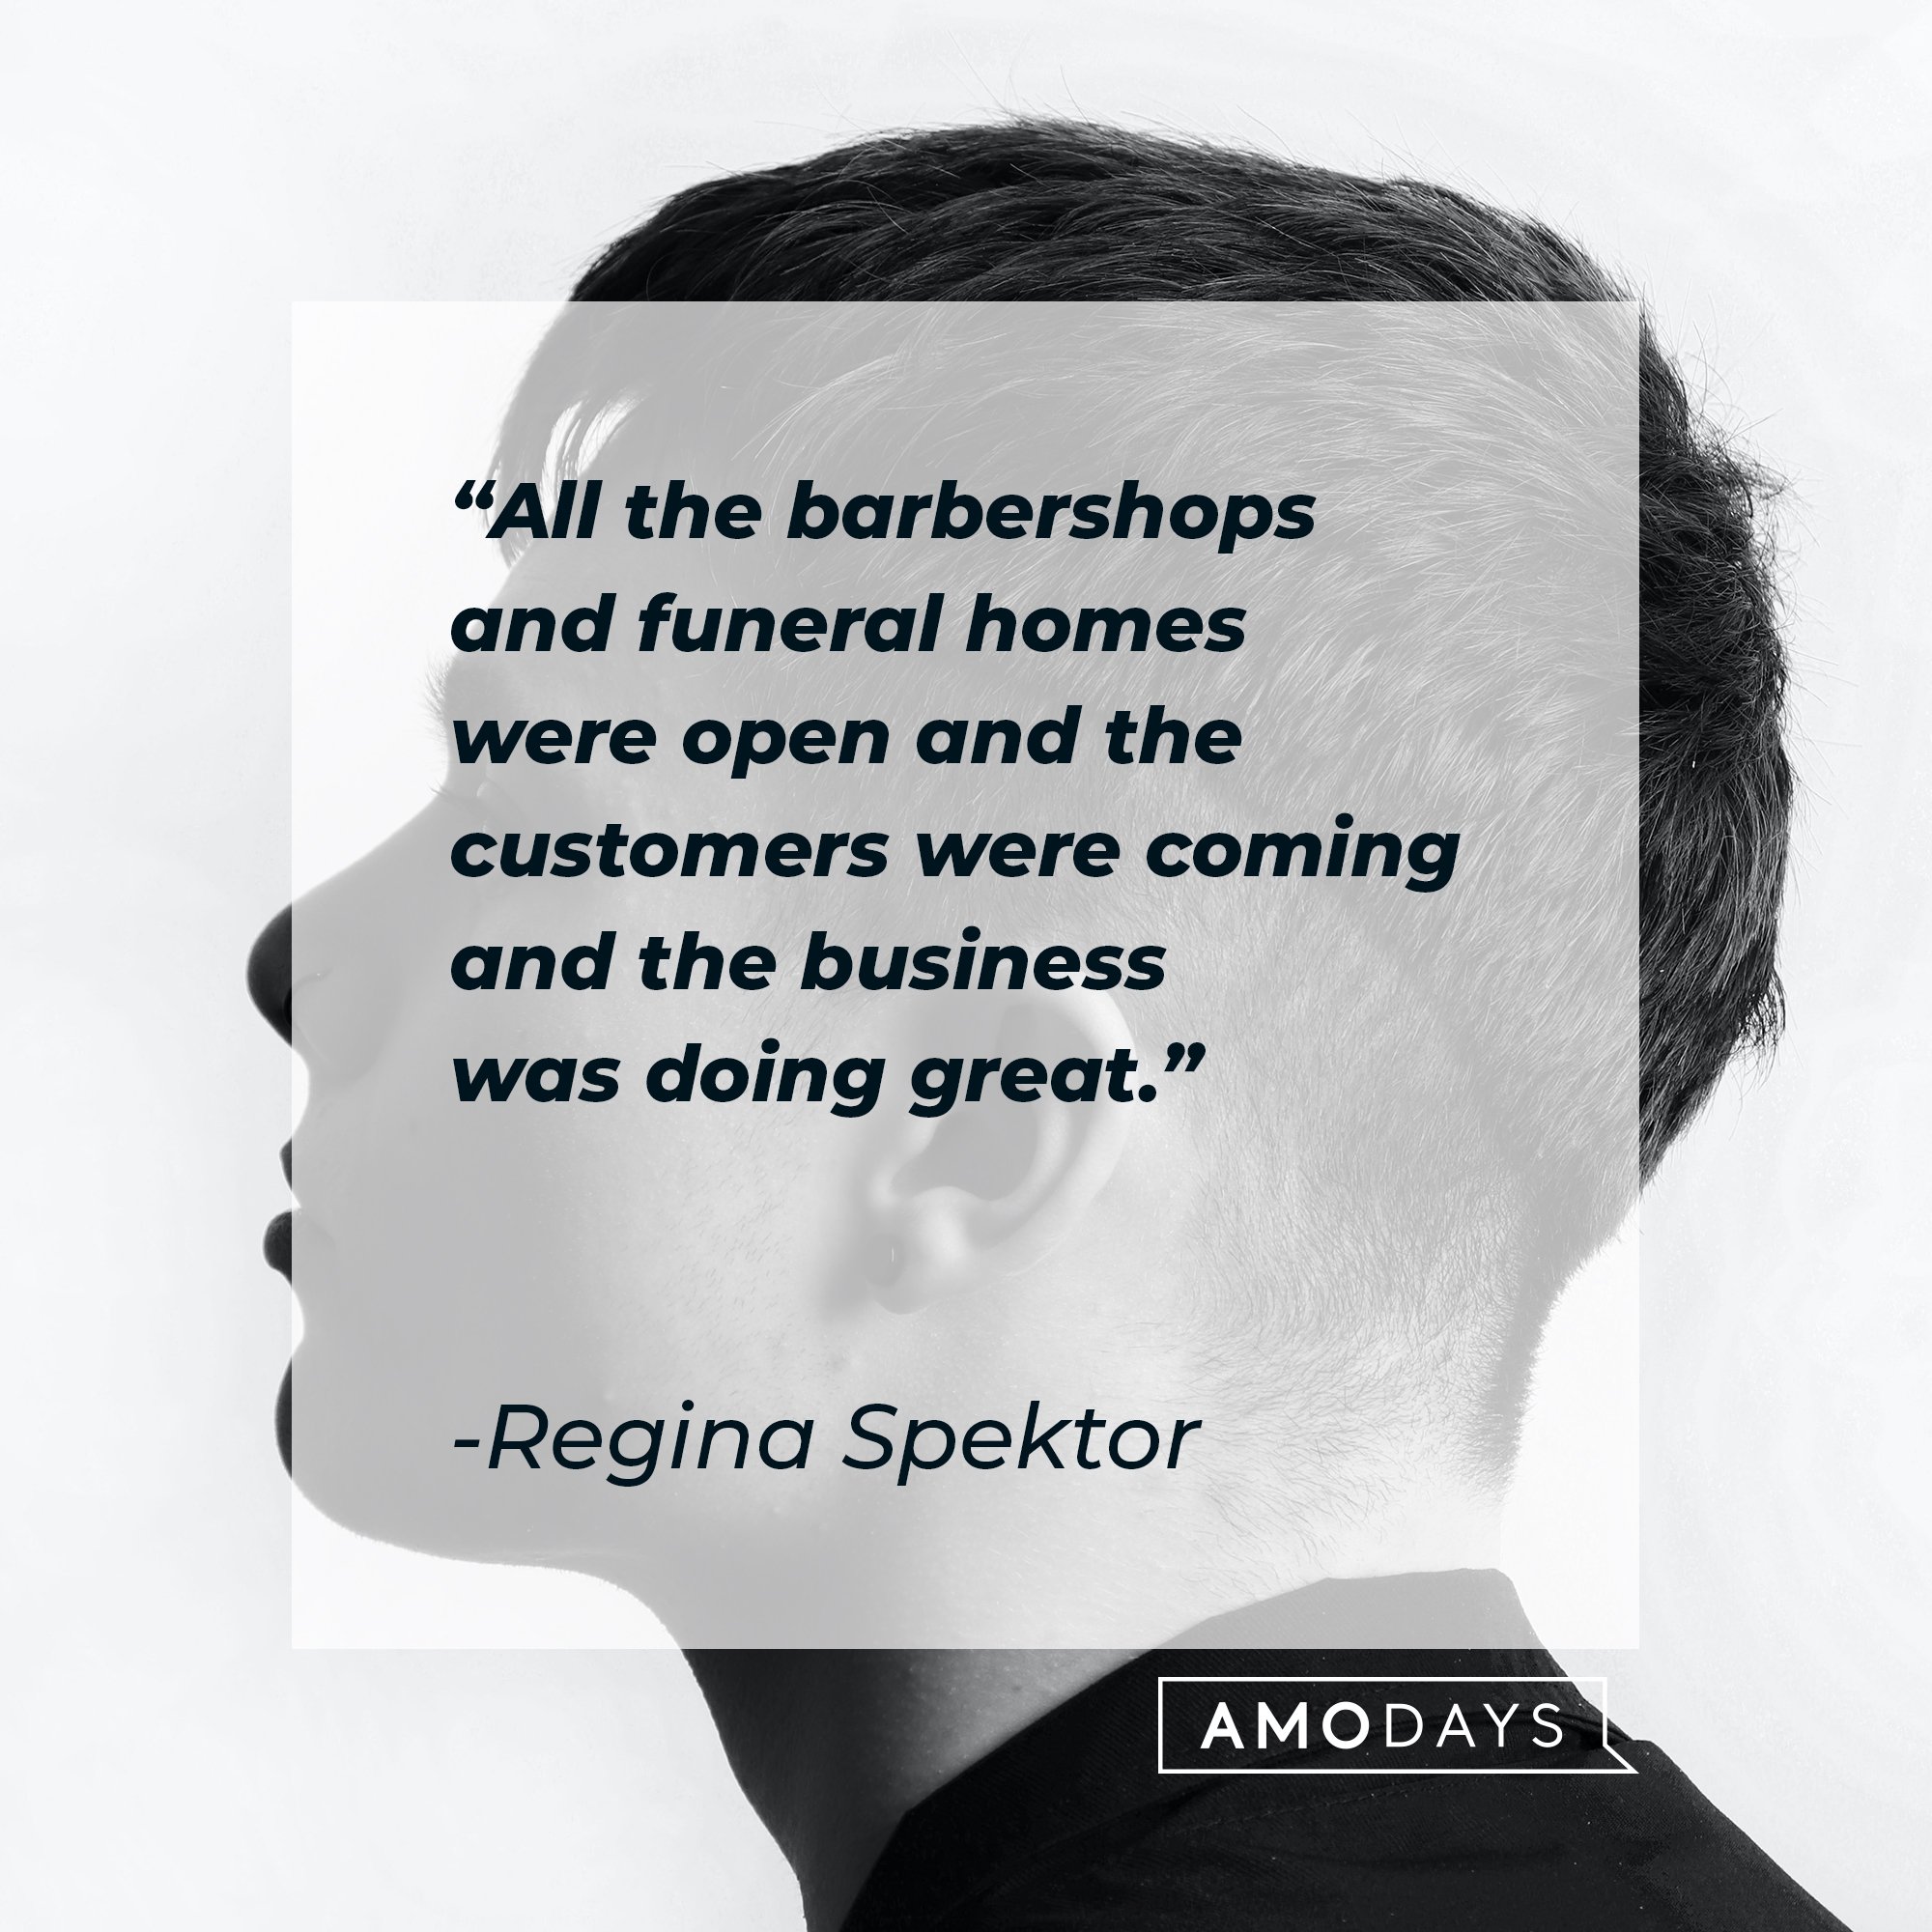 Regina Spektor's quote: "All the barbershops and funeral homes were open and the customers were coming and the business was doing great." | Image: AmoDays